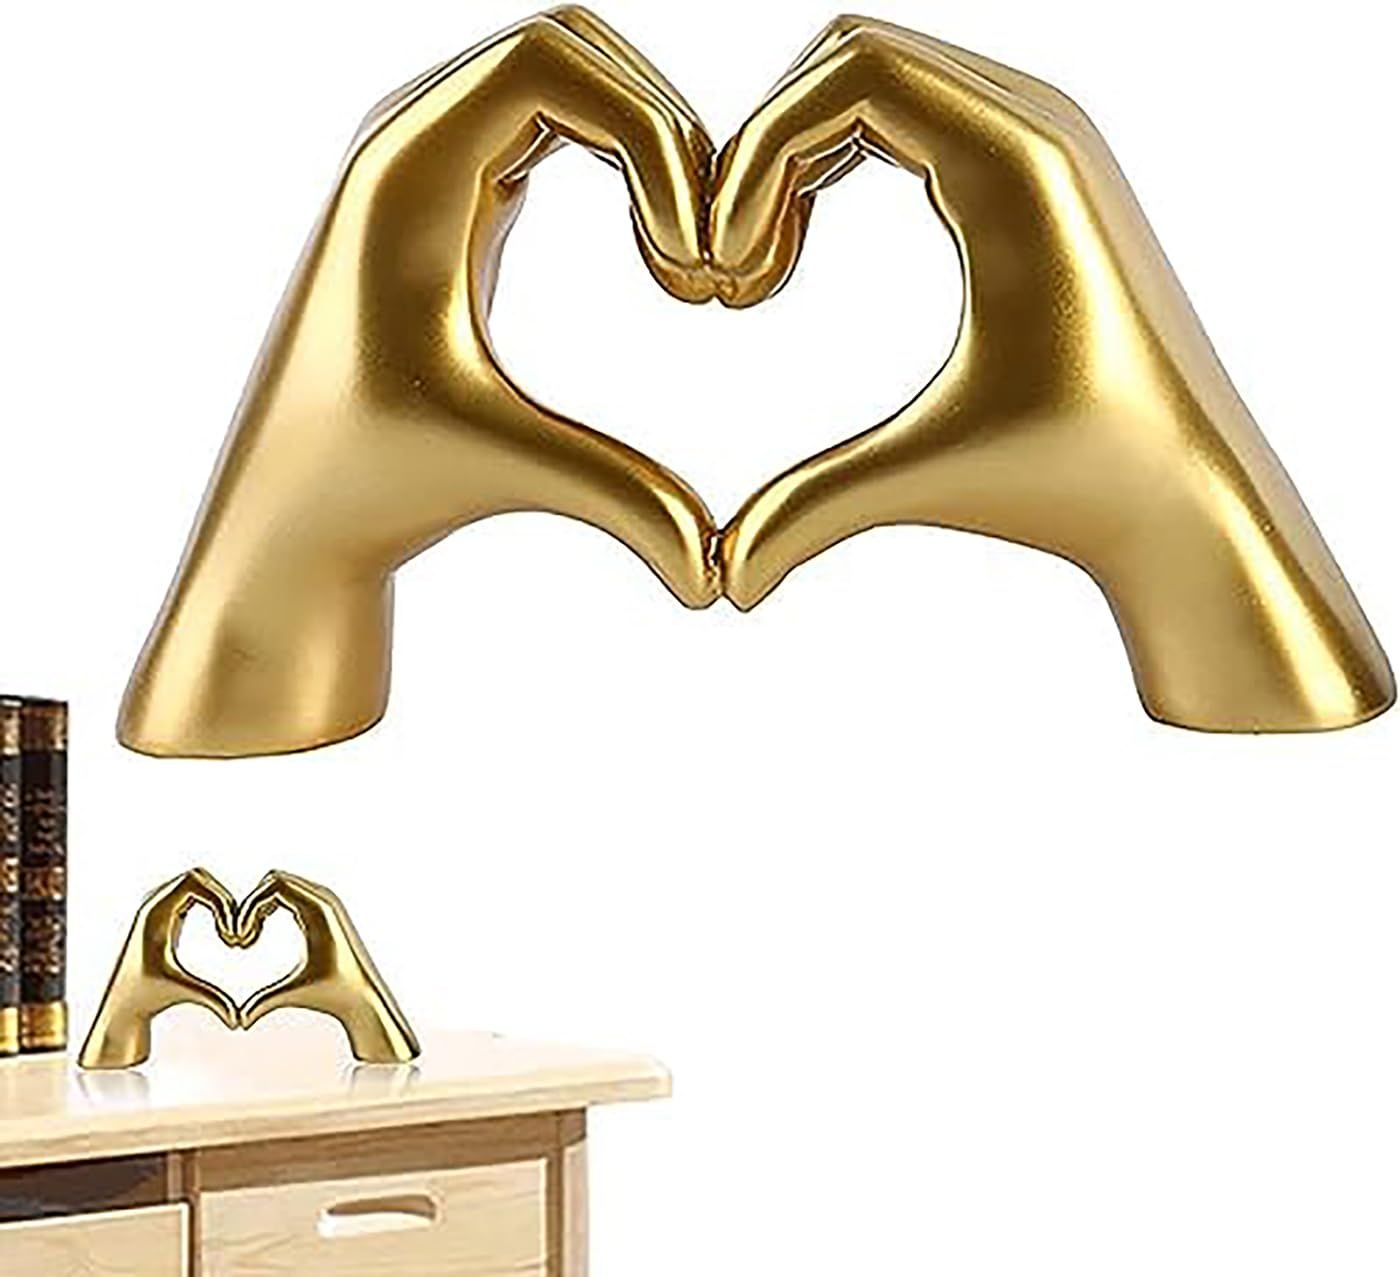 Hand Gesture Statues-Heart Shape Finger Statues Gold Home Decor Modern Style Figurine Decorative Ornaments for Living Room, Bedroom, Office Desktop, Cabinets | Amazon (US)